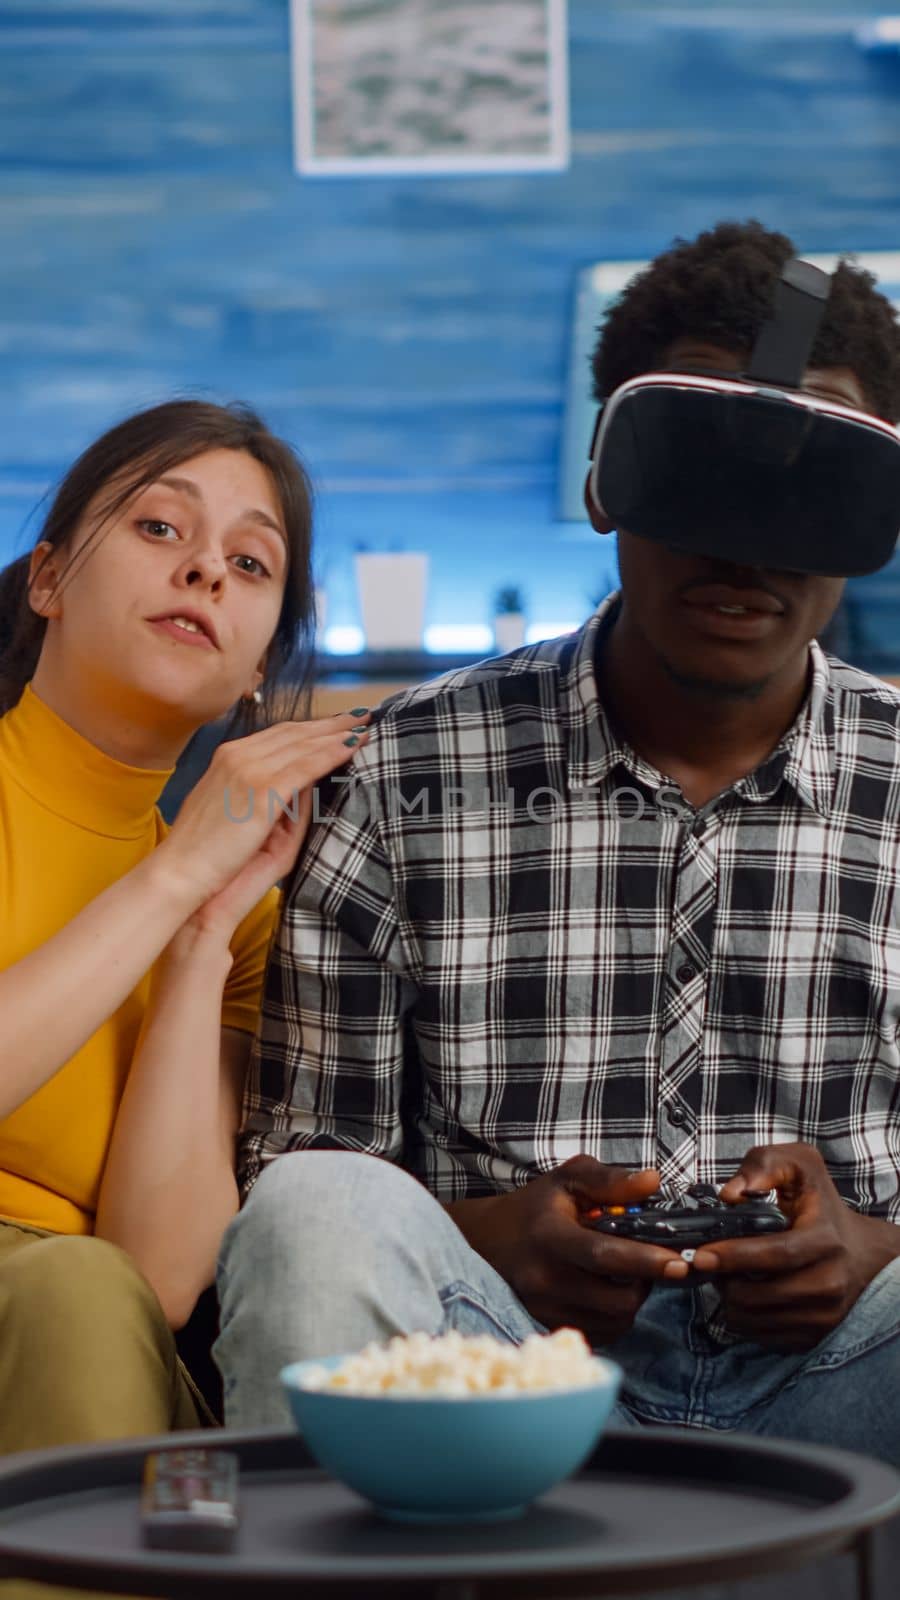 POV of interracial couple using technology for entertainment at home. African american man playing with vr glasses and controller for console while caucasian woman cheering and watching